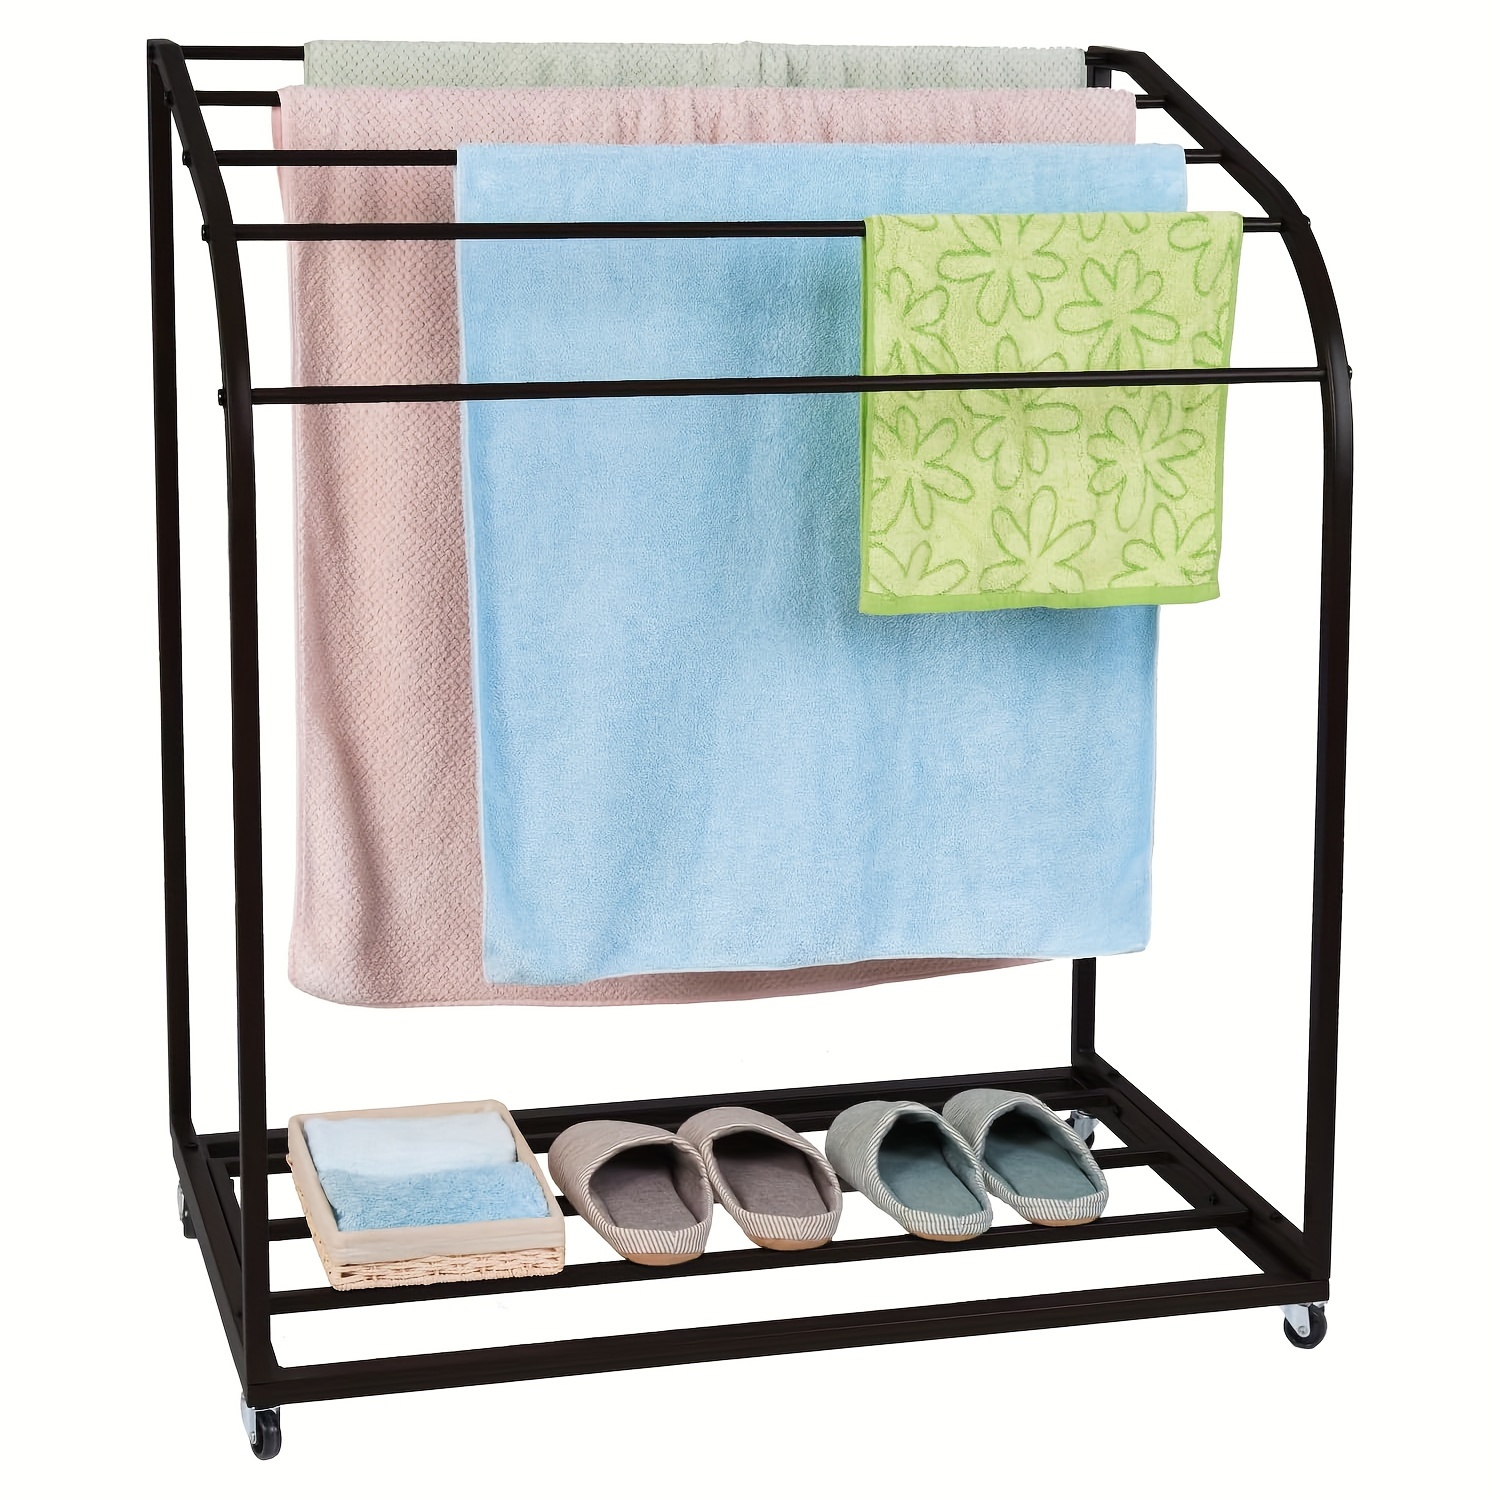 

1pc Outdoor Pool Towel Rack, Modern Style Metal 5-bar Storage Stand With Wheels, Indoor/ Beach/ Swimming Pool Rolling Towel Organizer